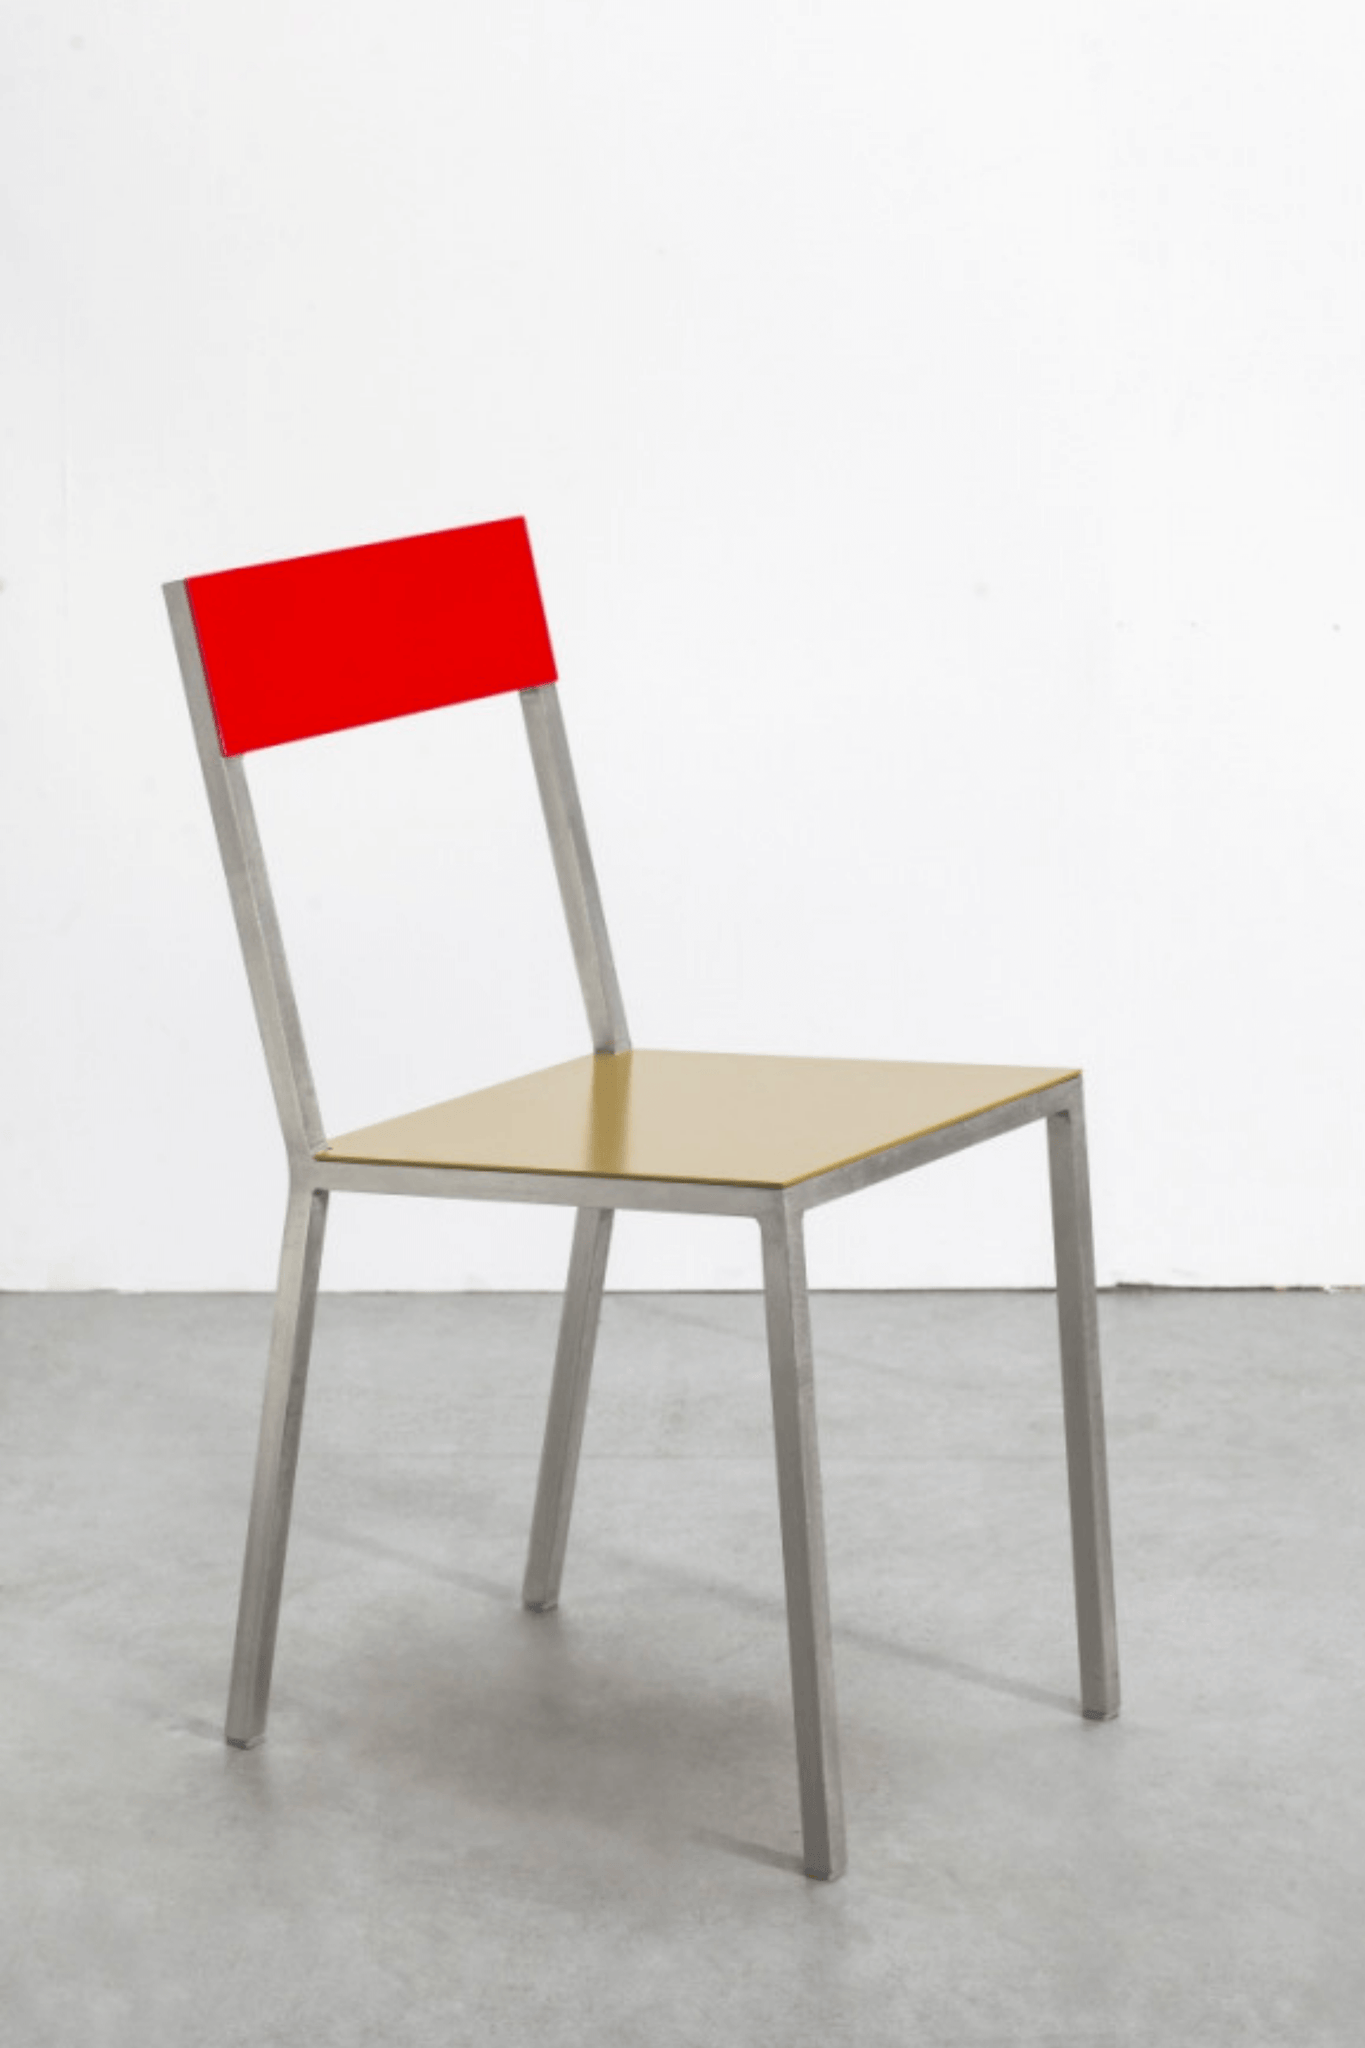 Curry & Red Aluminum Alu Chair by Muller Van Severen for Valerie Objects, front angled view